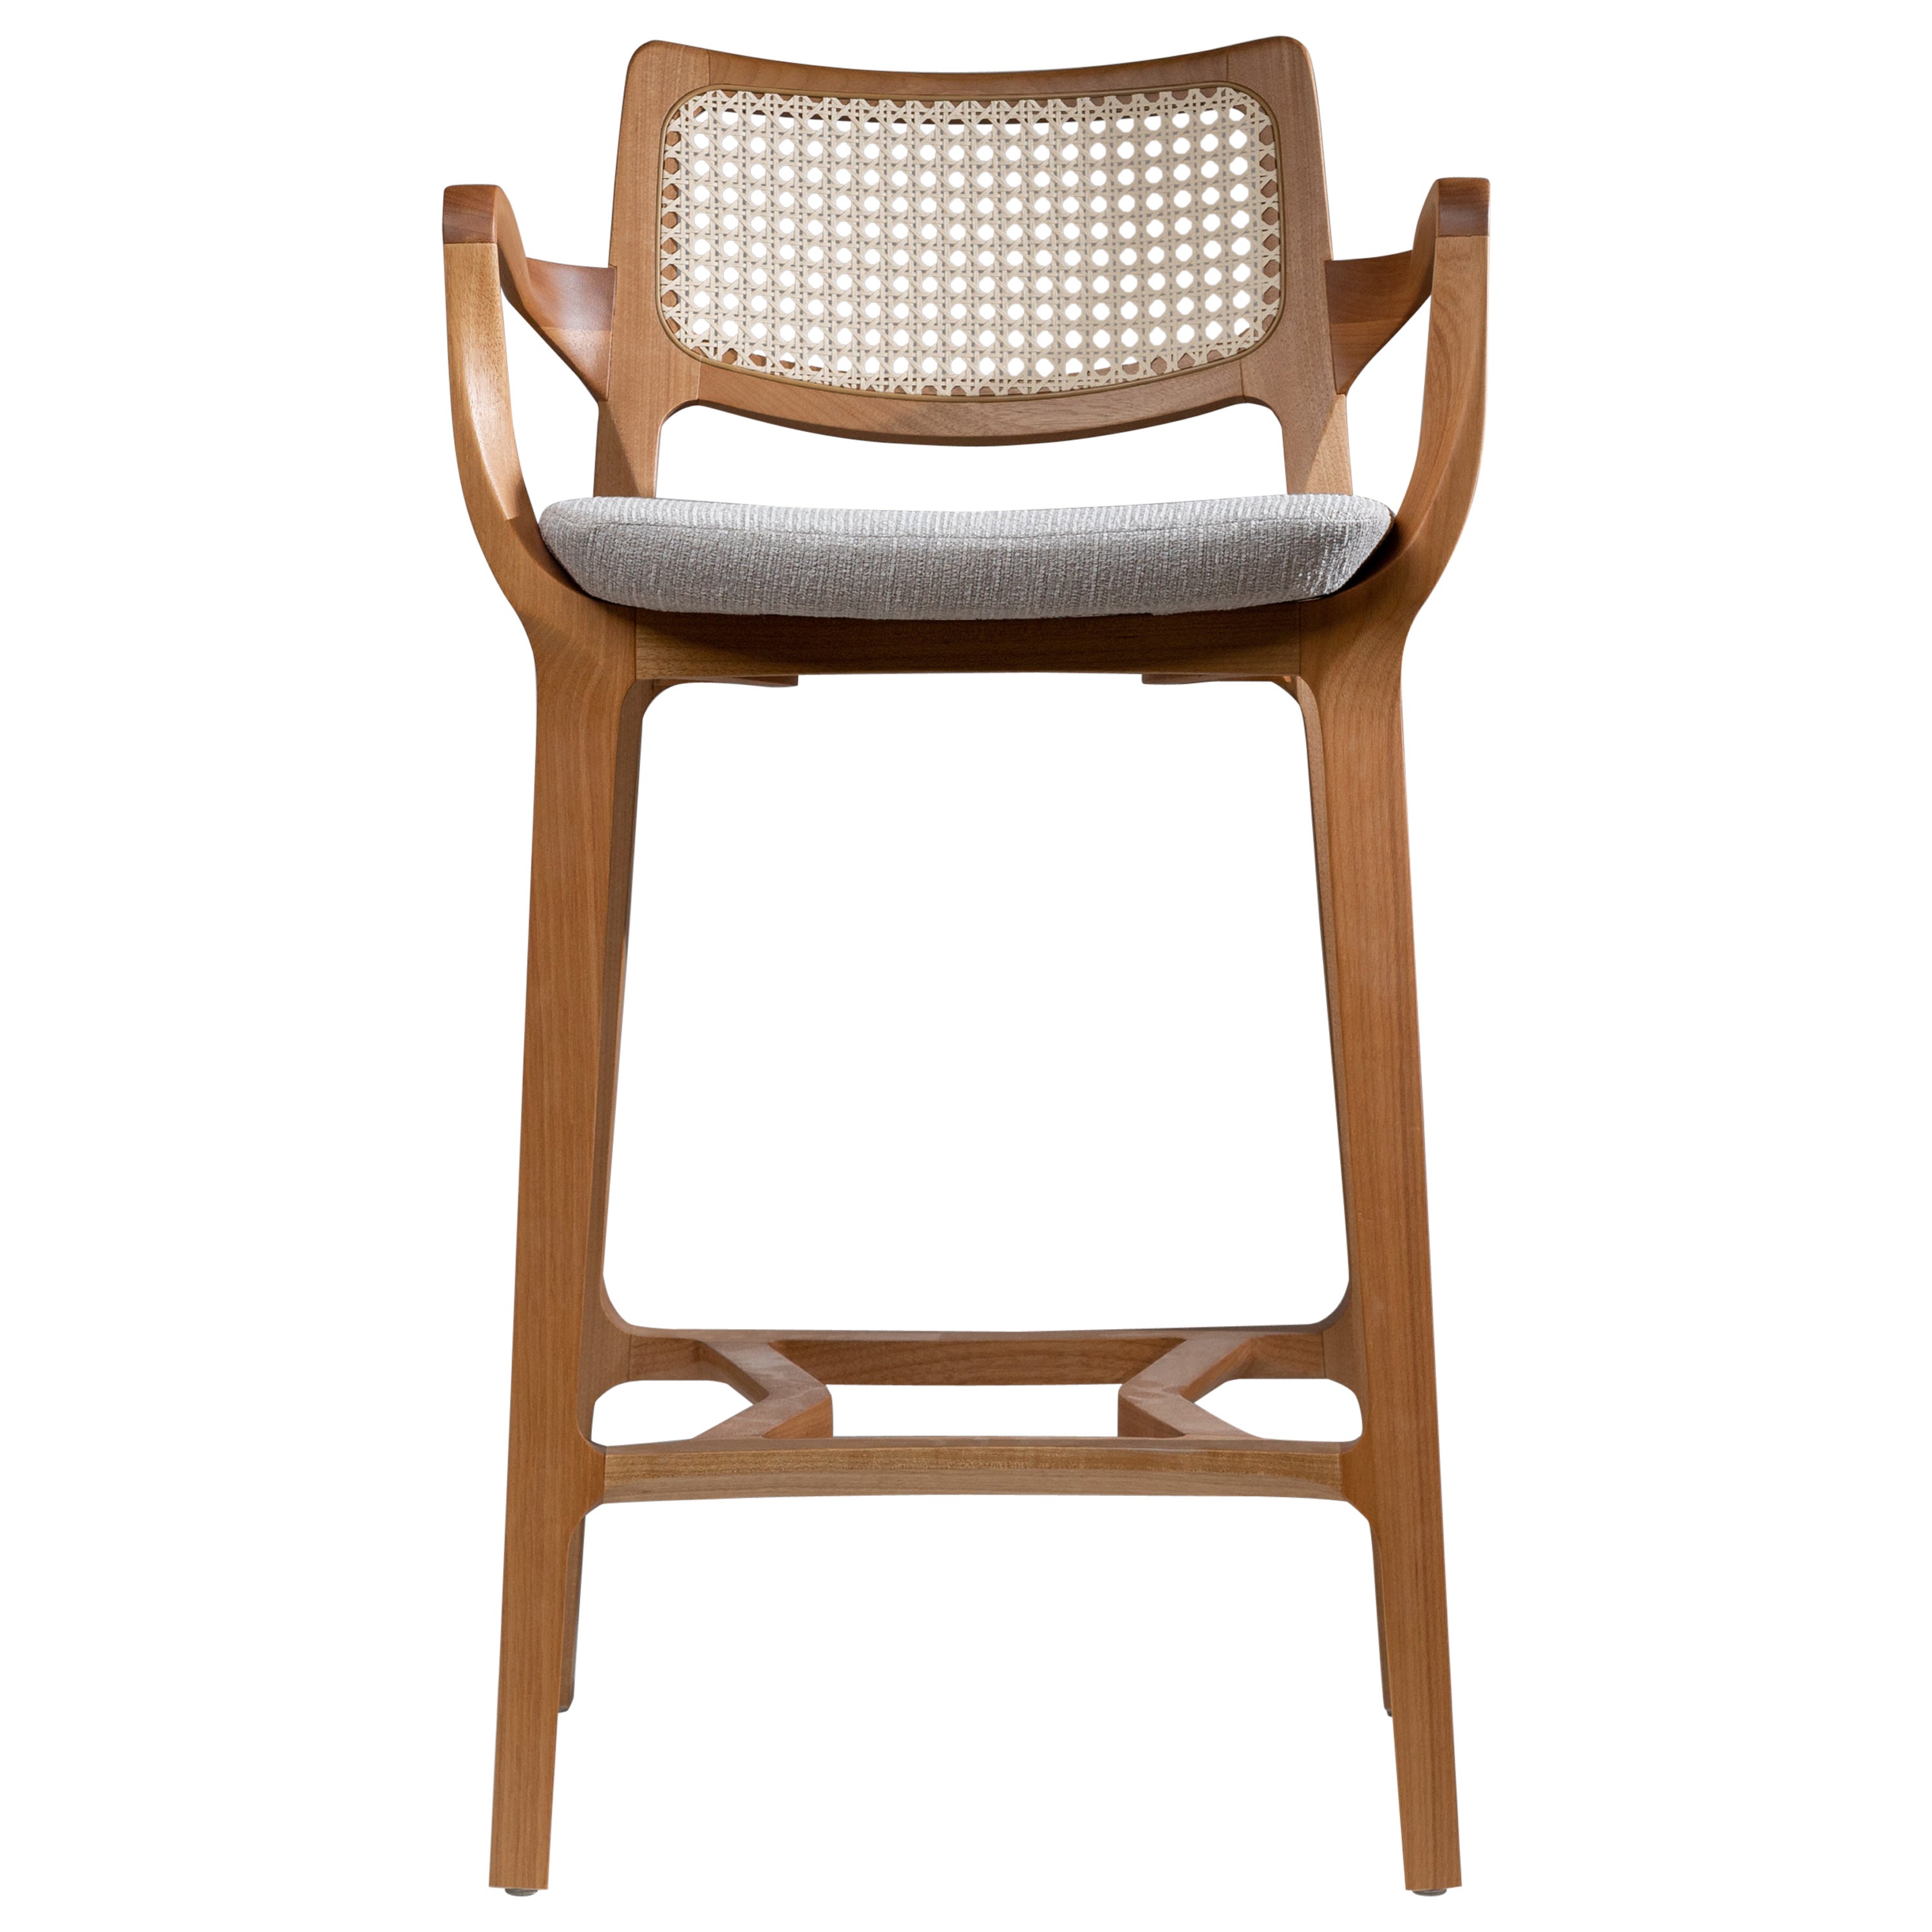 Post Modern Stool in Solid Wood, Caning Back and Seat, Counter or Bar Height For Sale